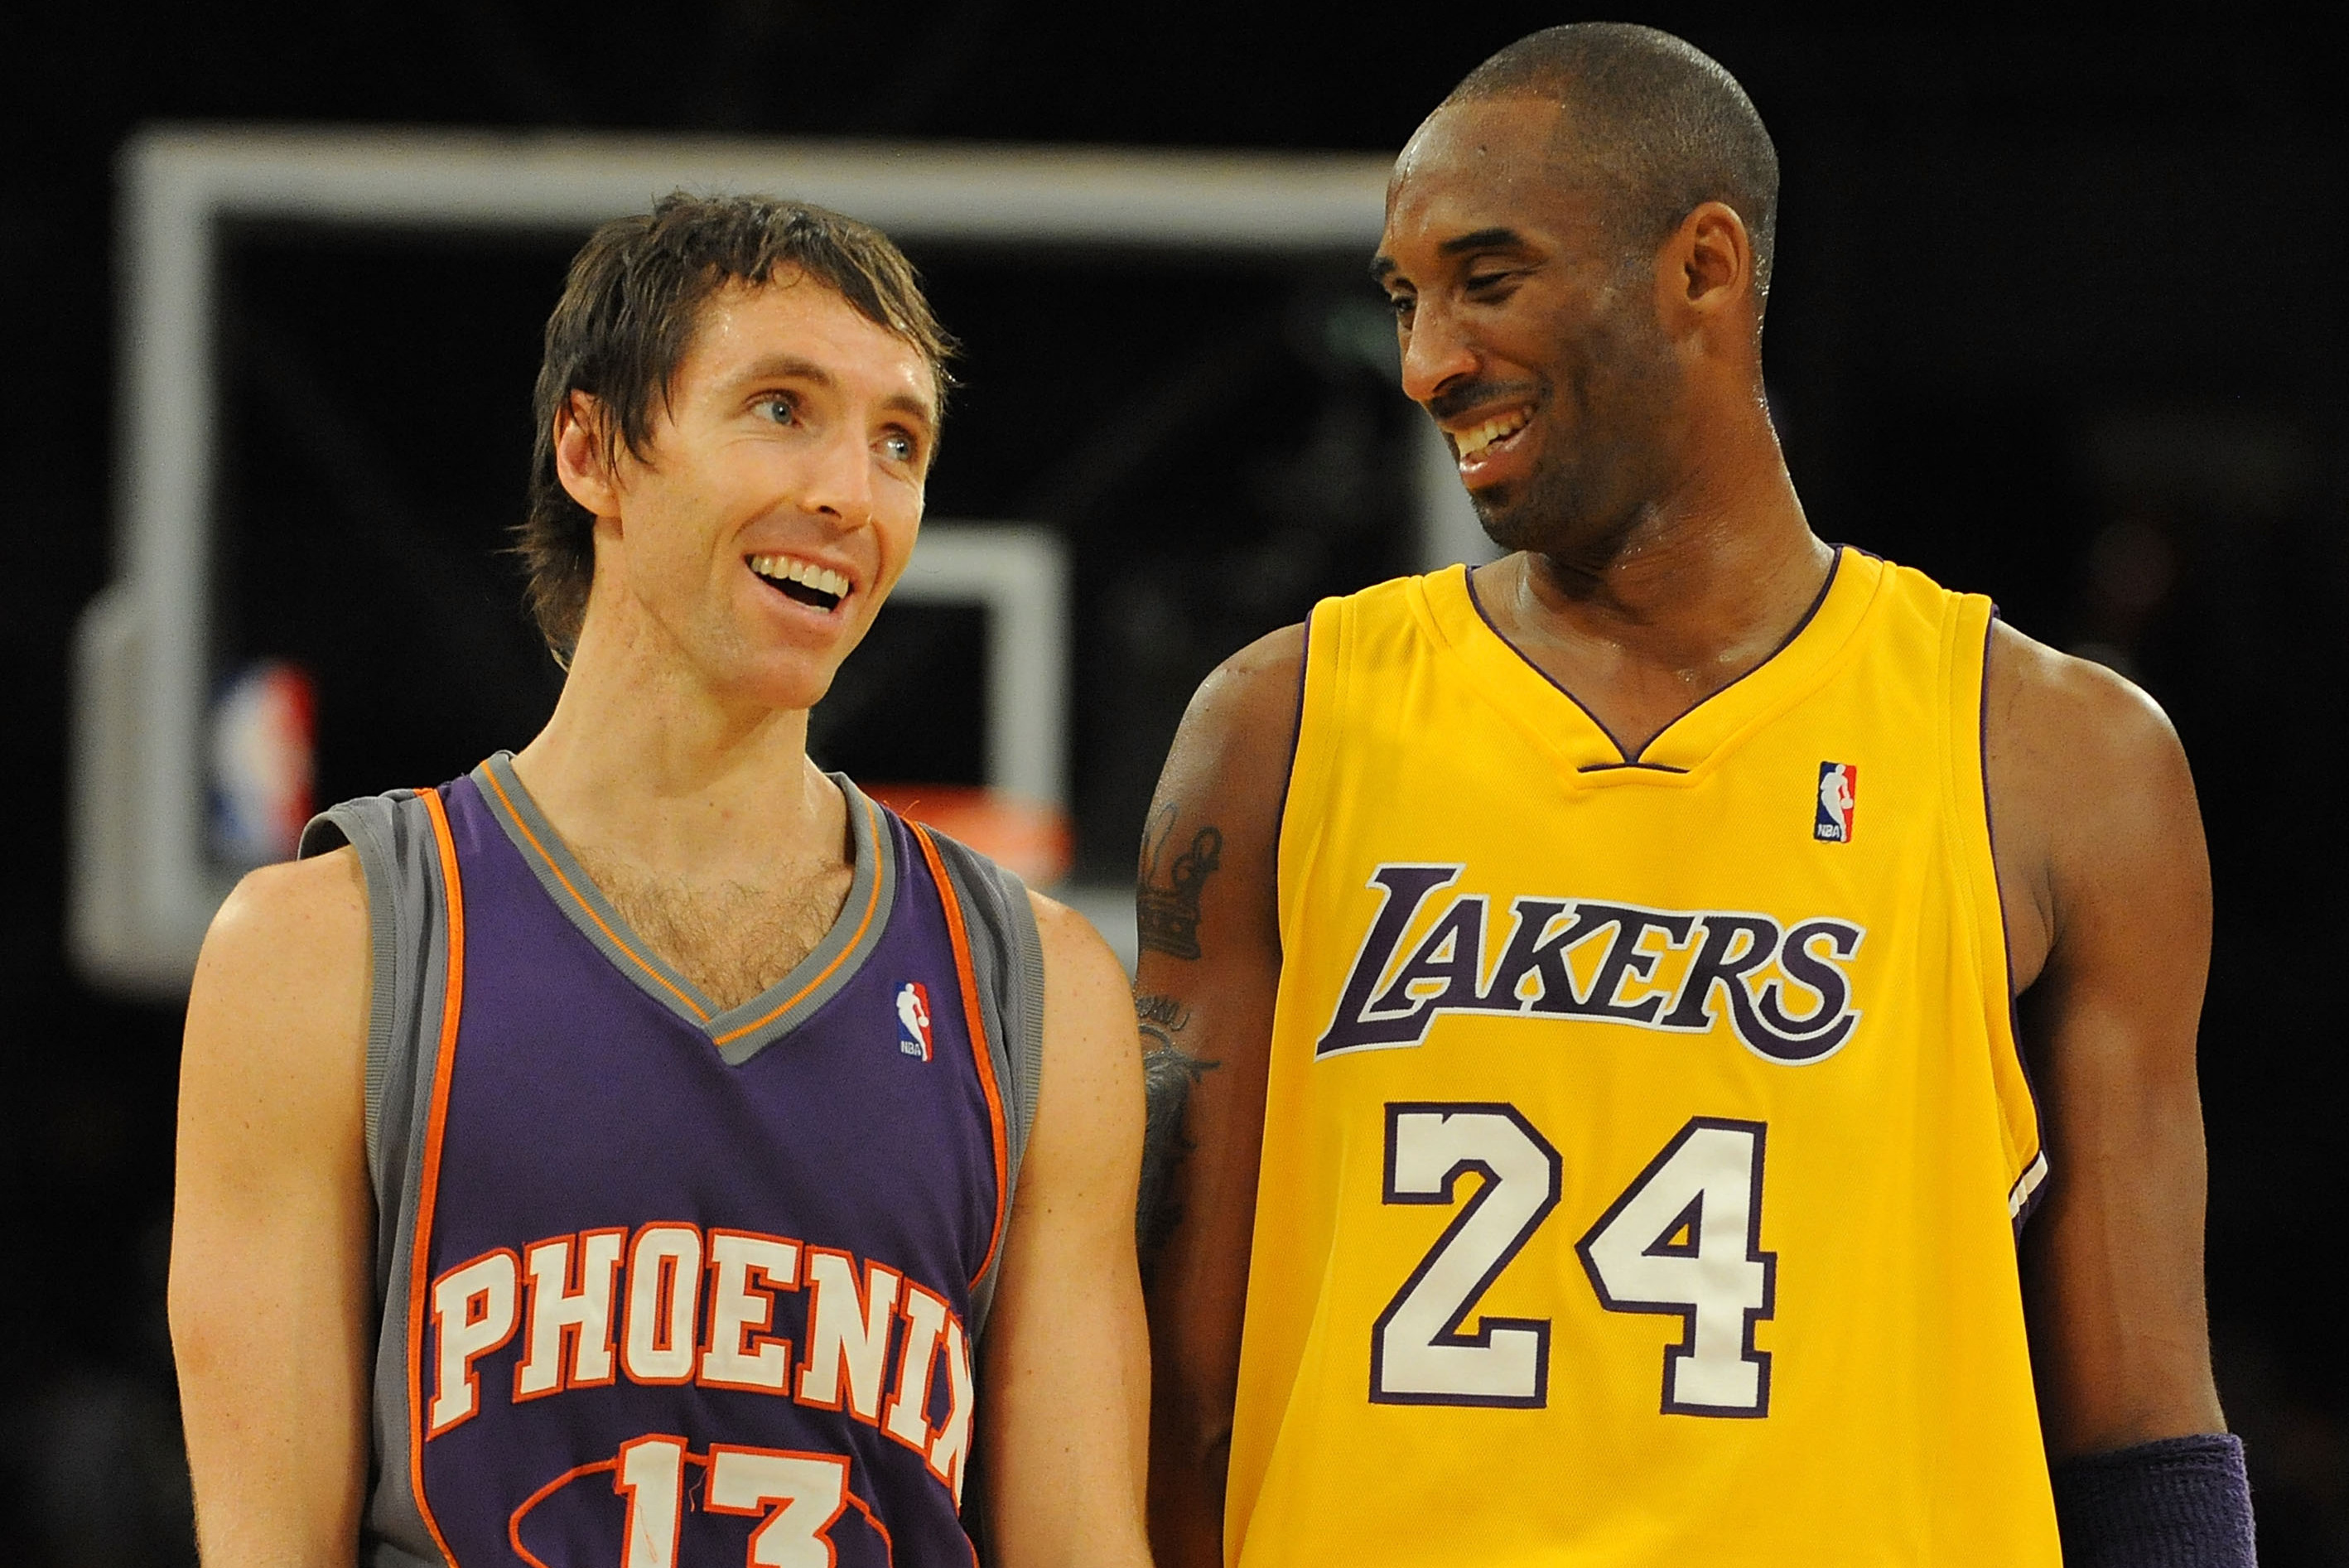 Shaquille O'Neal, Steve Nash, and The NBA's Current All-Over-35-Team, News, Scores, Highlights, Stats, and Rumors